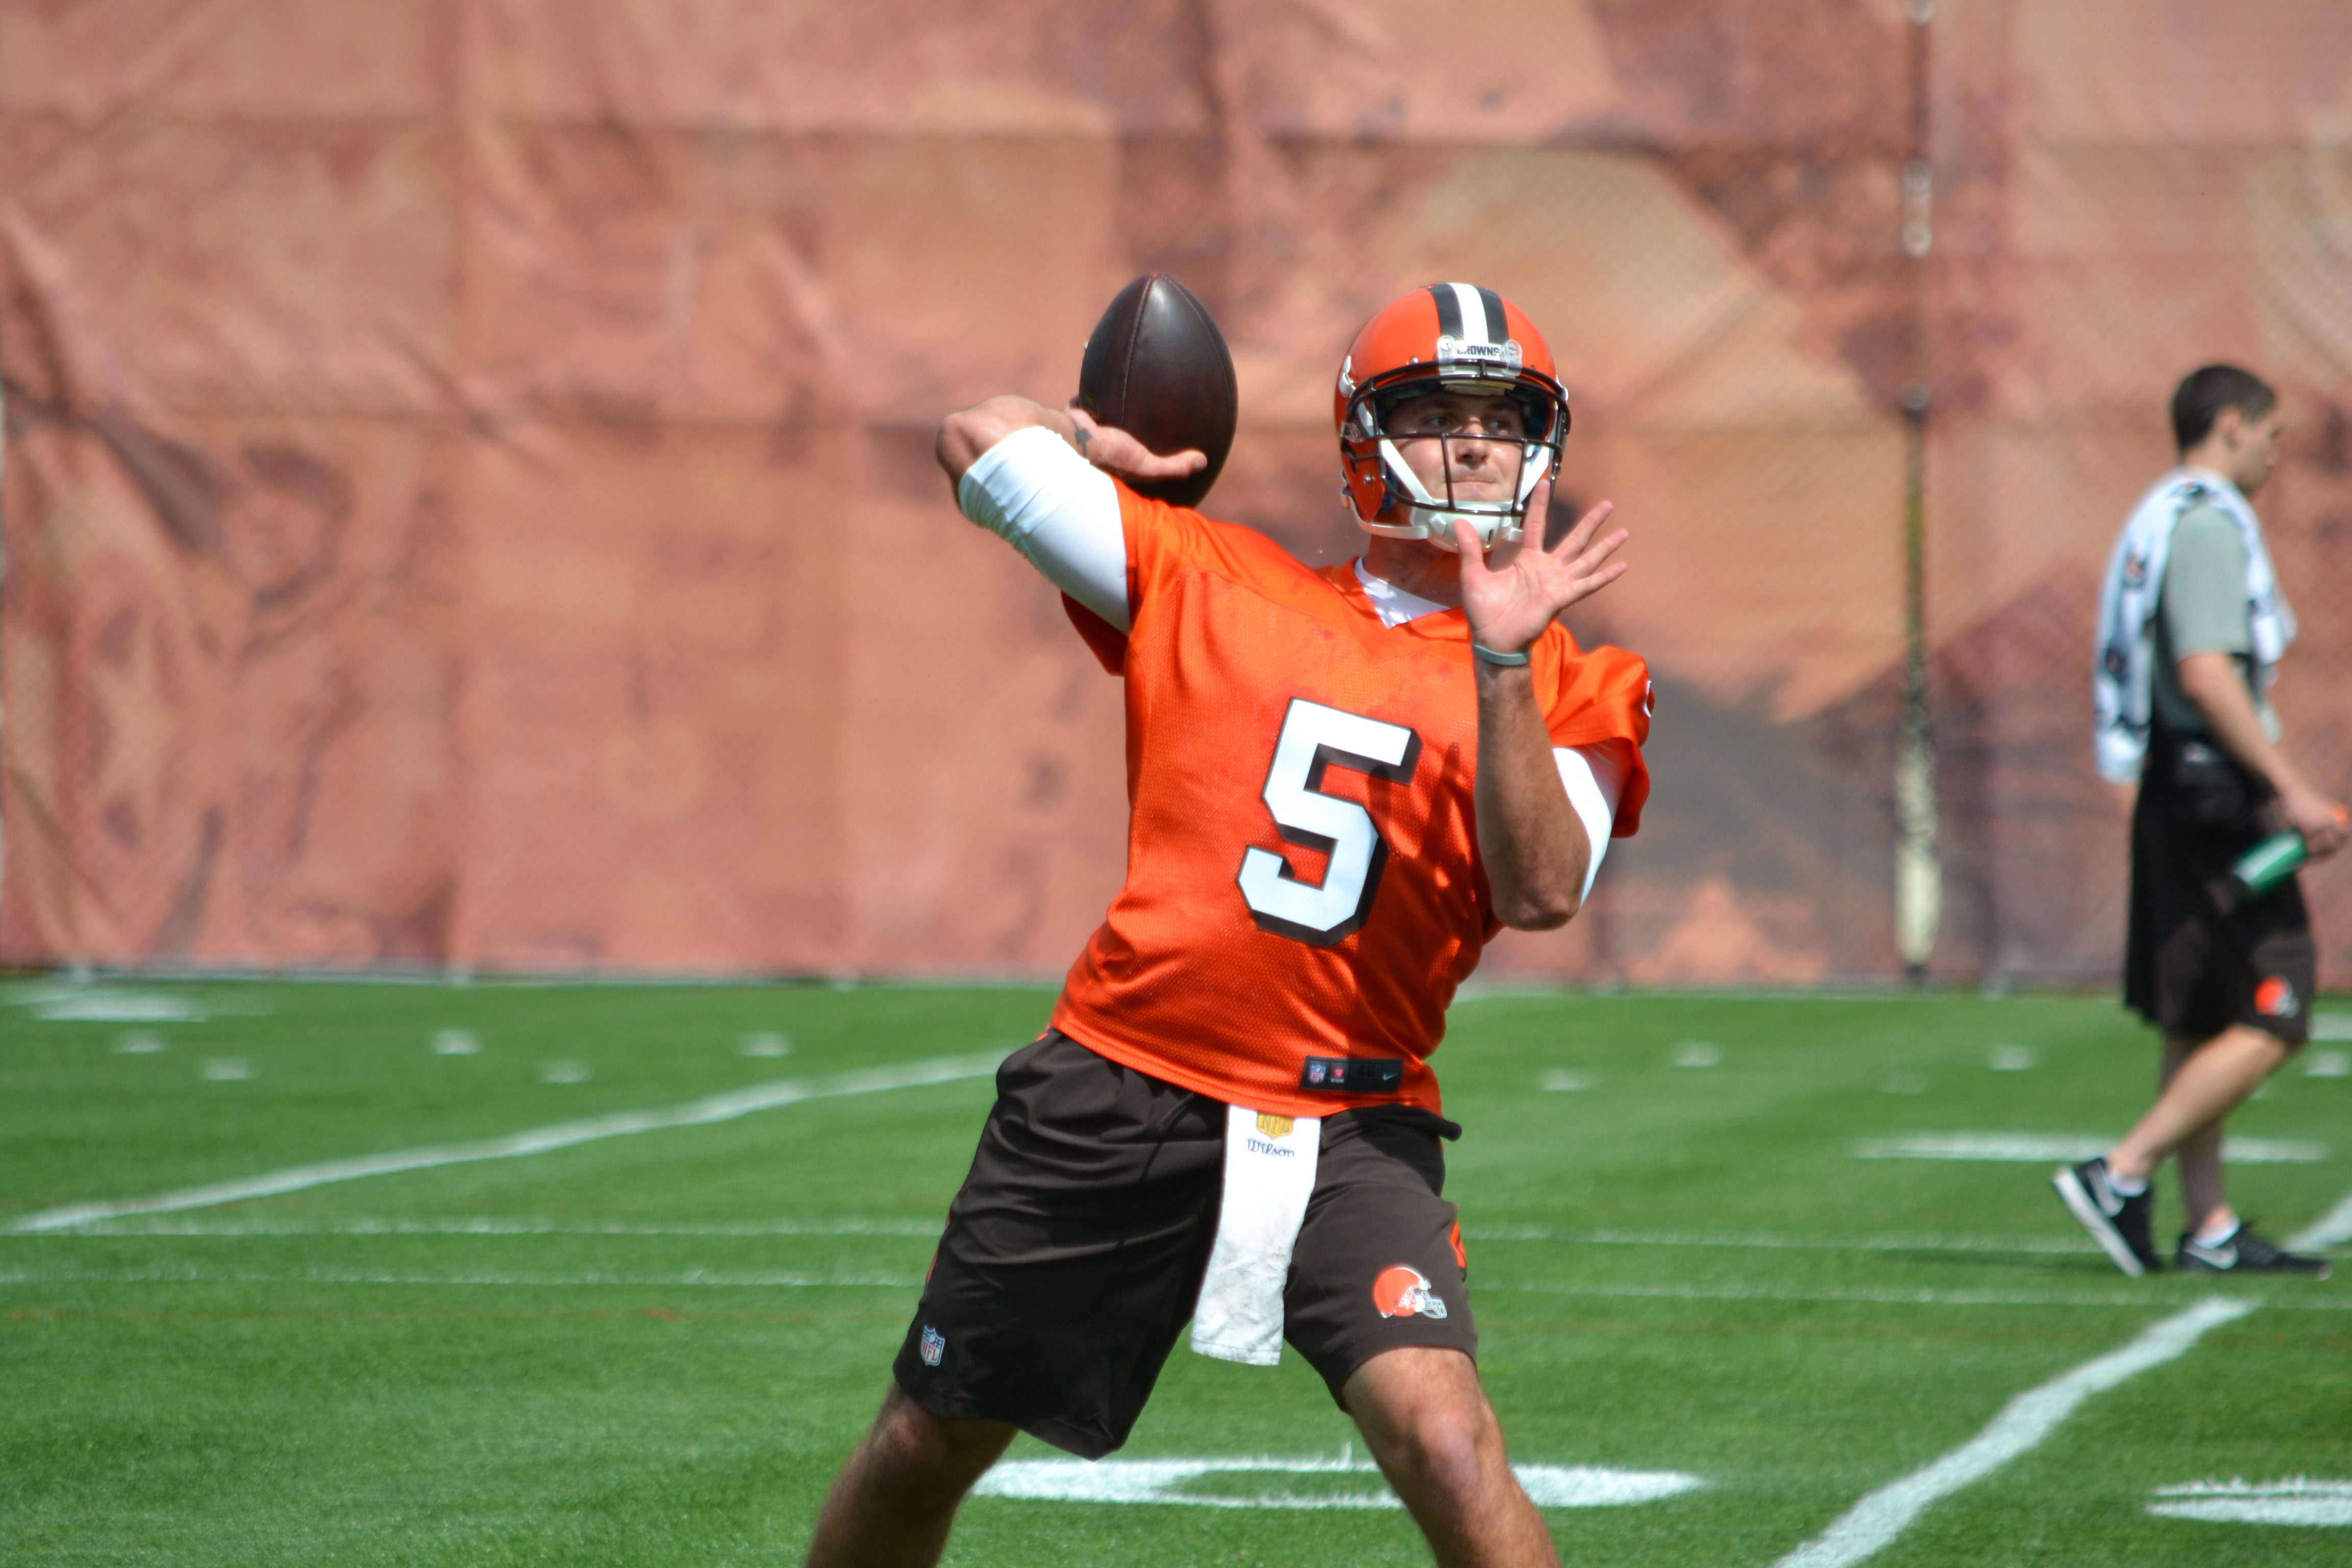 Cleveland Browns will look to trade quarterback Cody Kessler